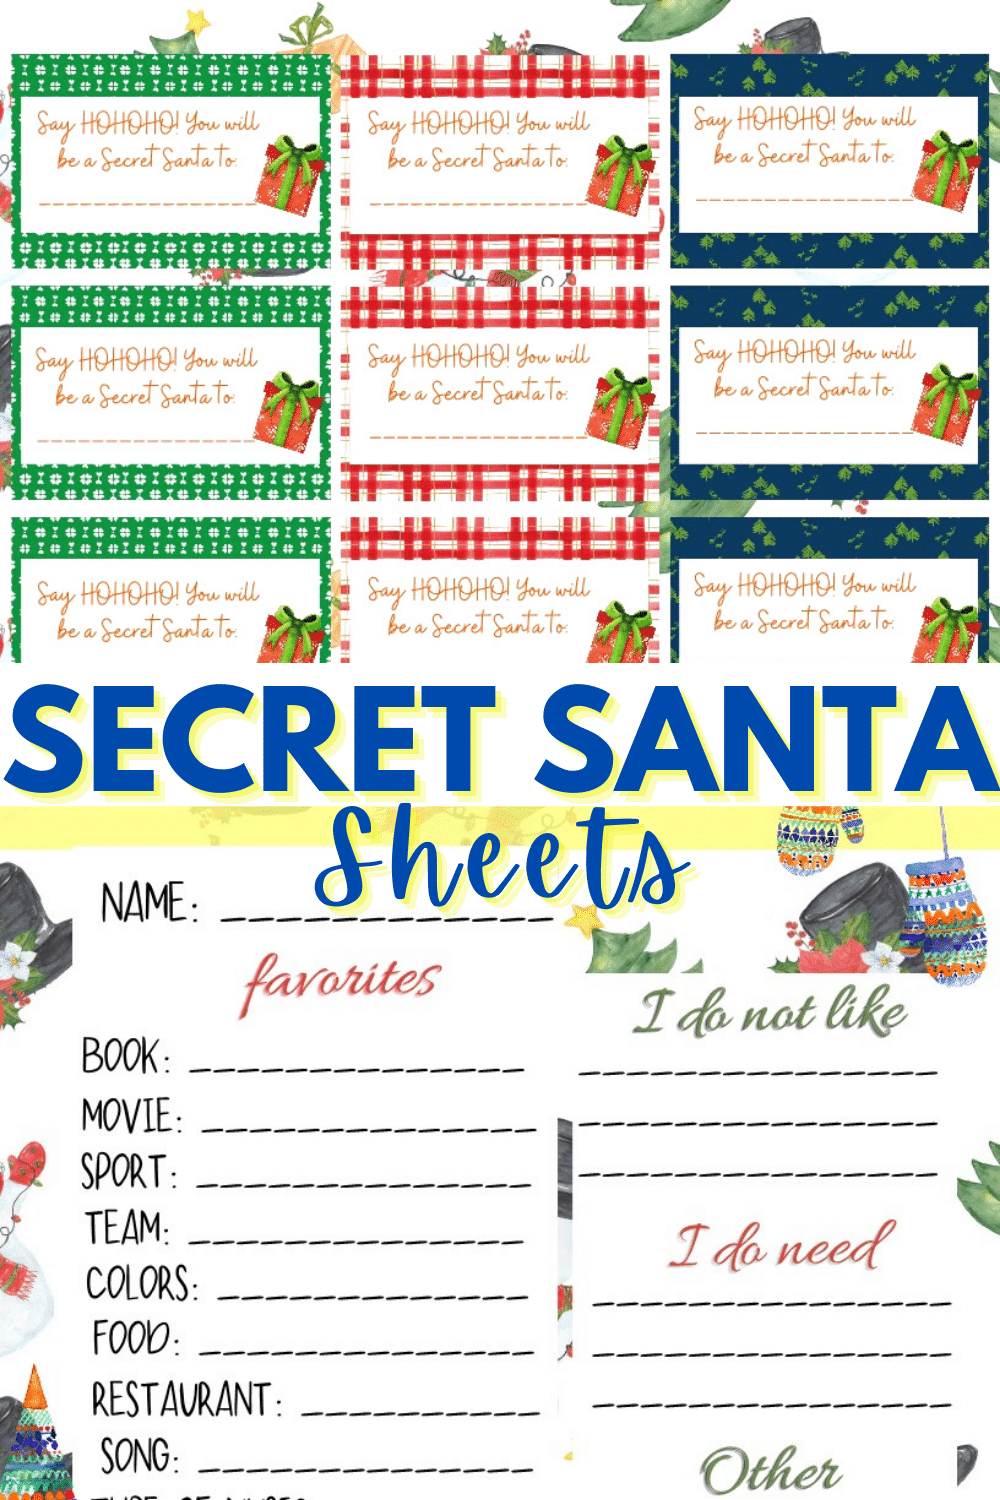 Use these Secret Santa Sheets as a fun way to create an epic gift exchange. This free download is a great way to draw names and participate. #secretsanta #giftexchange #freedownload #freeprintable #christmas via @wondermomwannab